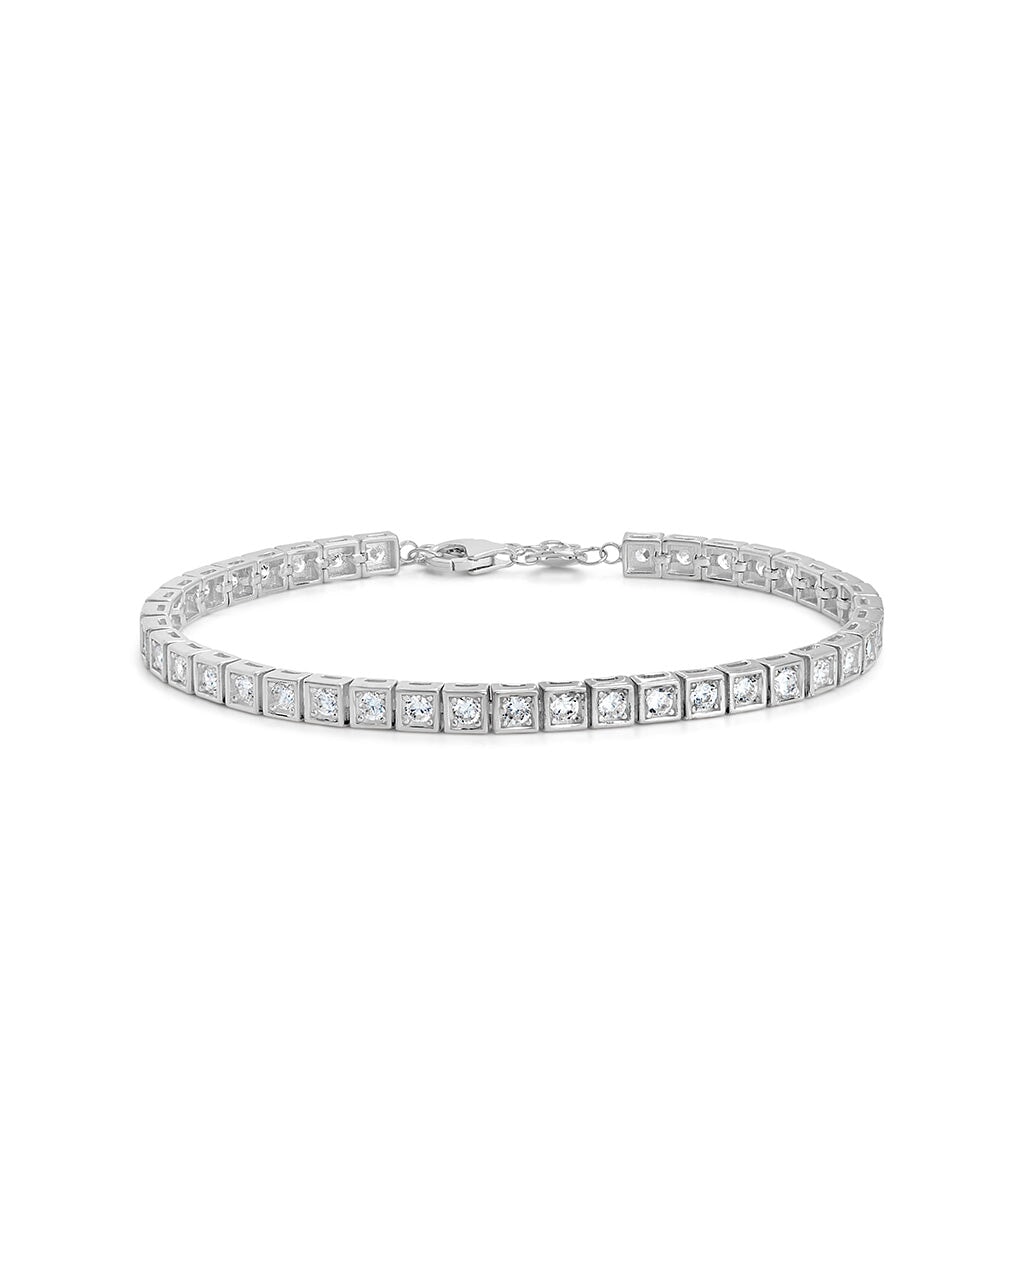 Our Ultimate Tennis Bracelet Buying Guide | Best Places to Buy From